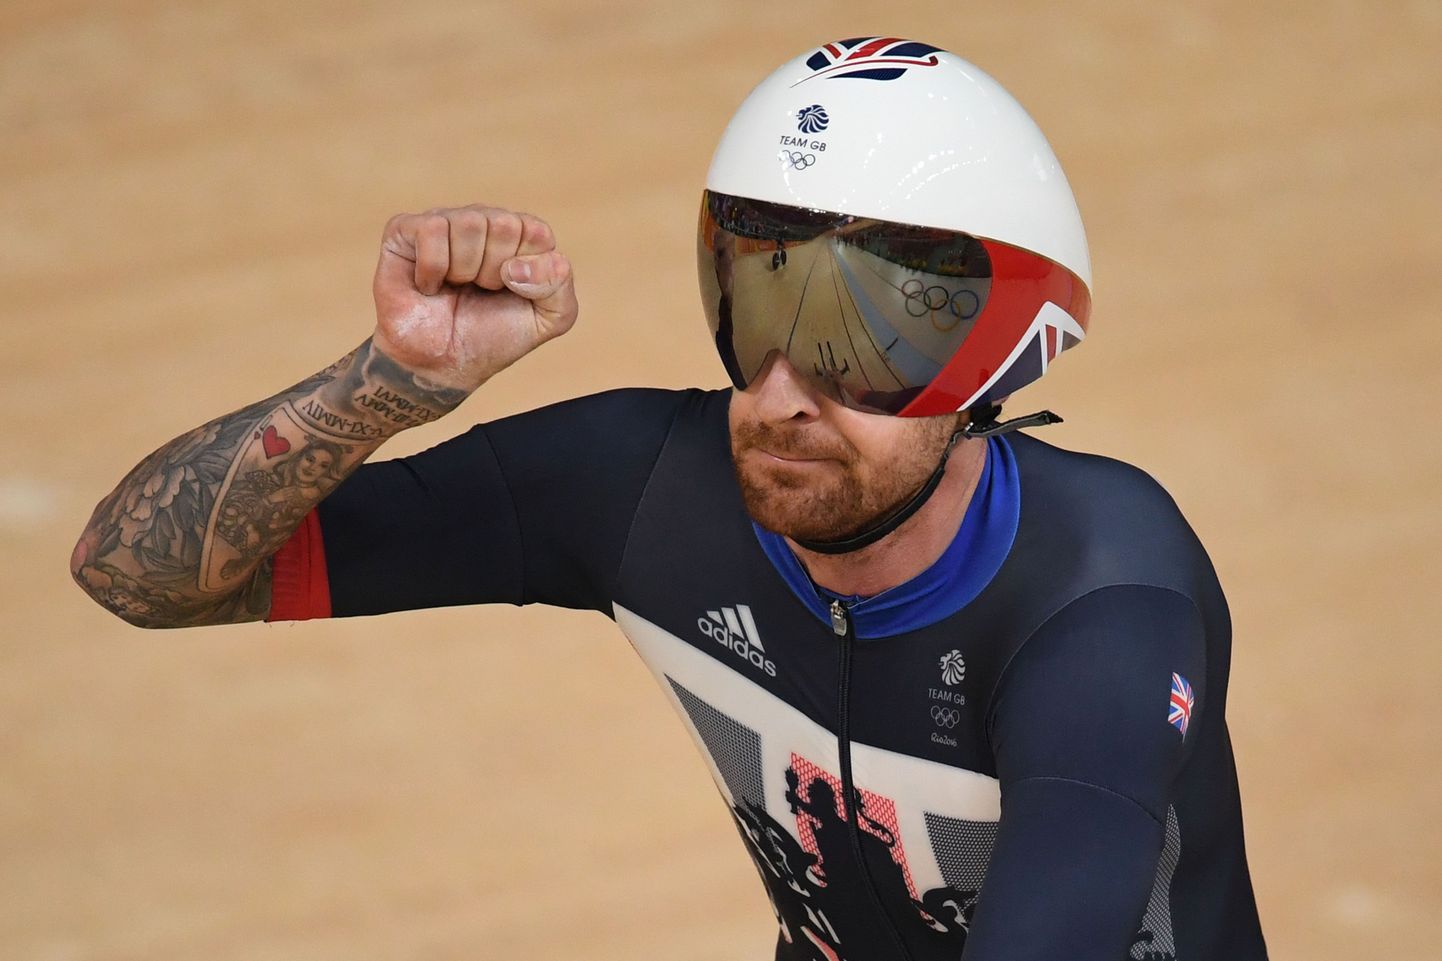 Britain's Bradley Wiggins celebrates after setting a world record after competing with teammates in the men's Team Pursuit qualifying track cycling event at the Velodrome during the Rio 2016 Olympic Games in Rio de Janeiro on August 12, 2016. / AFP PHOTO / Eric FEFERBERG